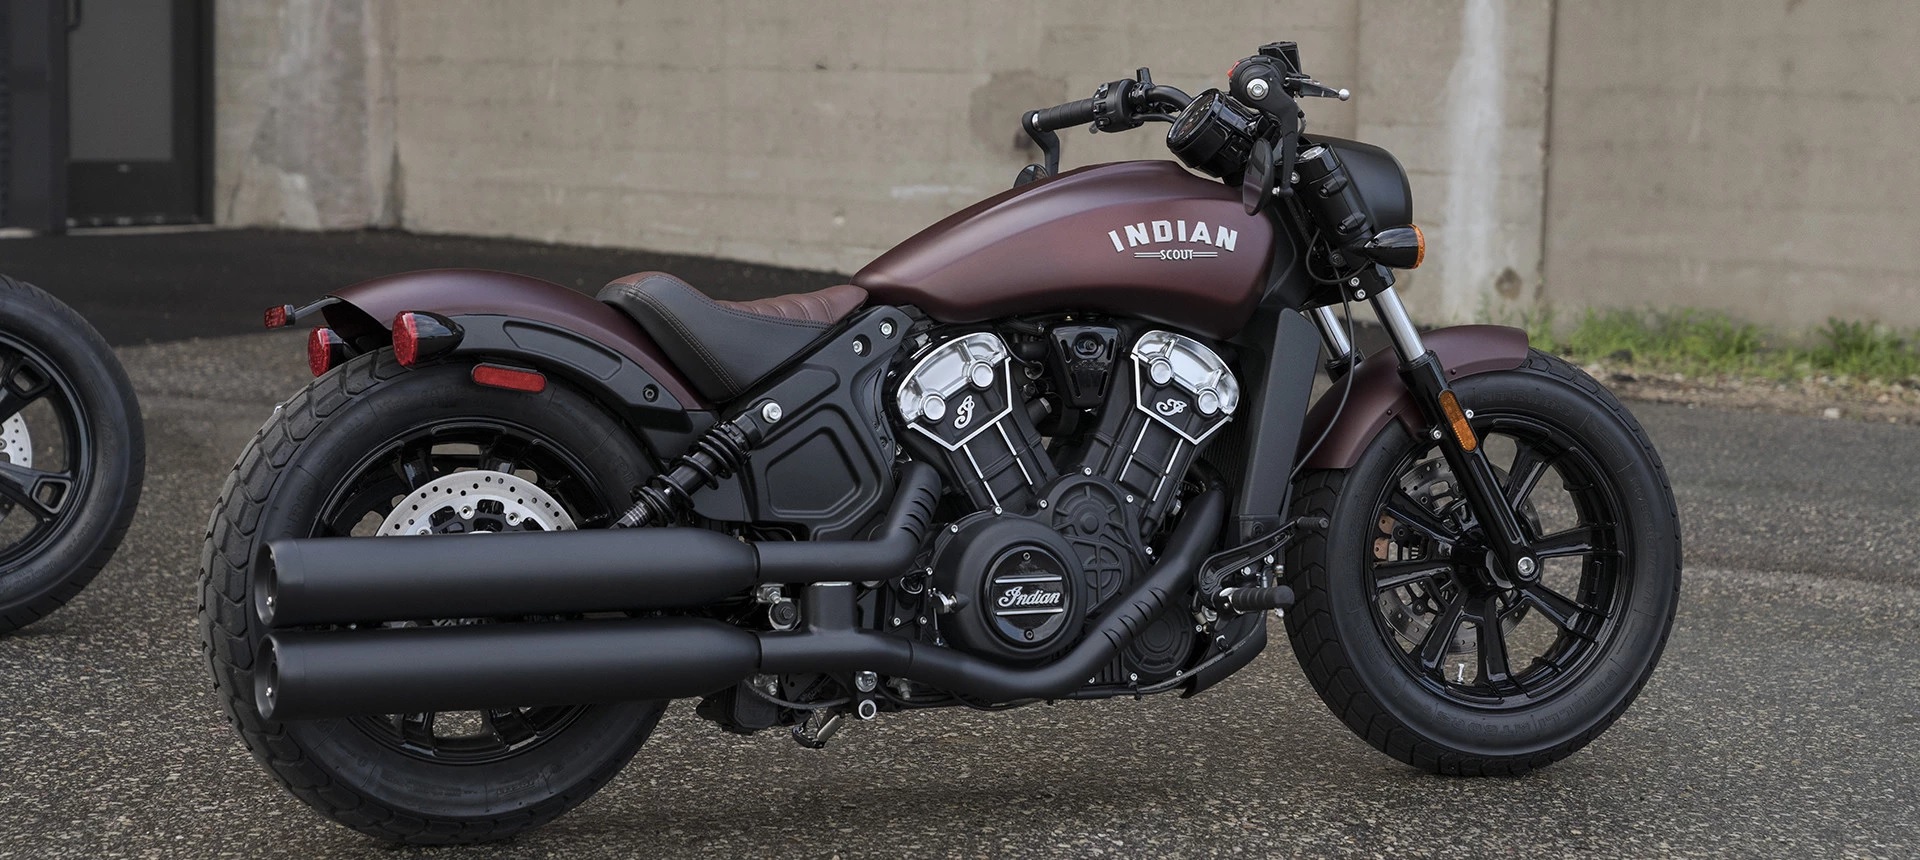 2021 Indian Scout Bobber [Specs, Features, Photos] wBW